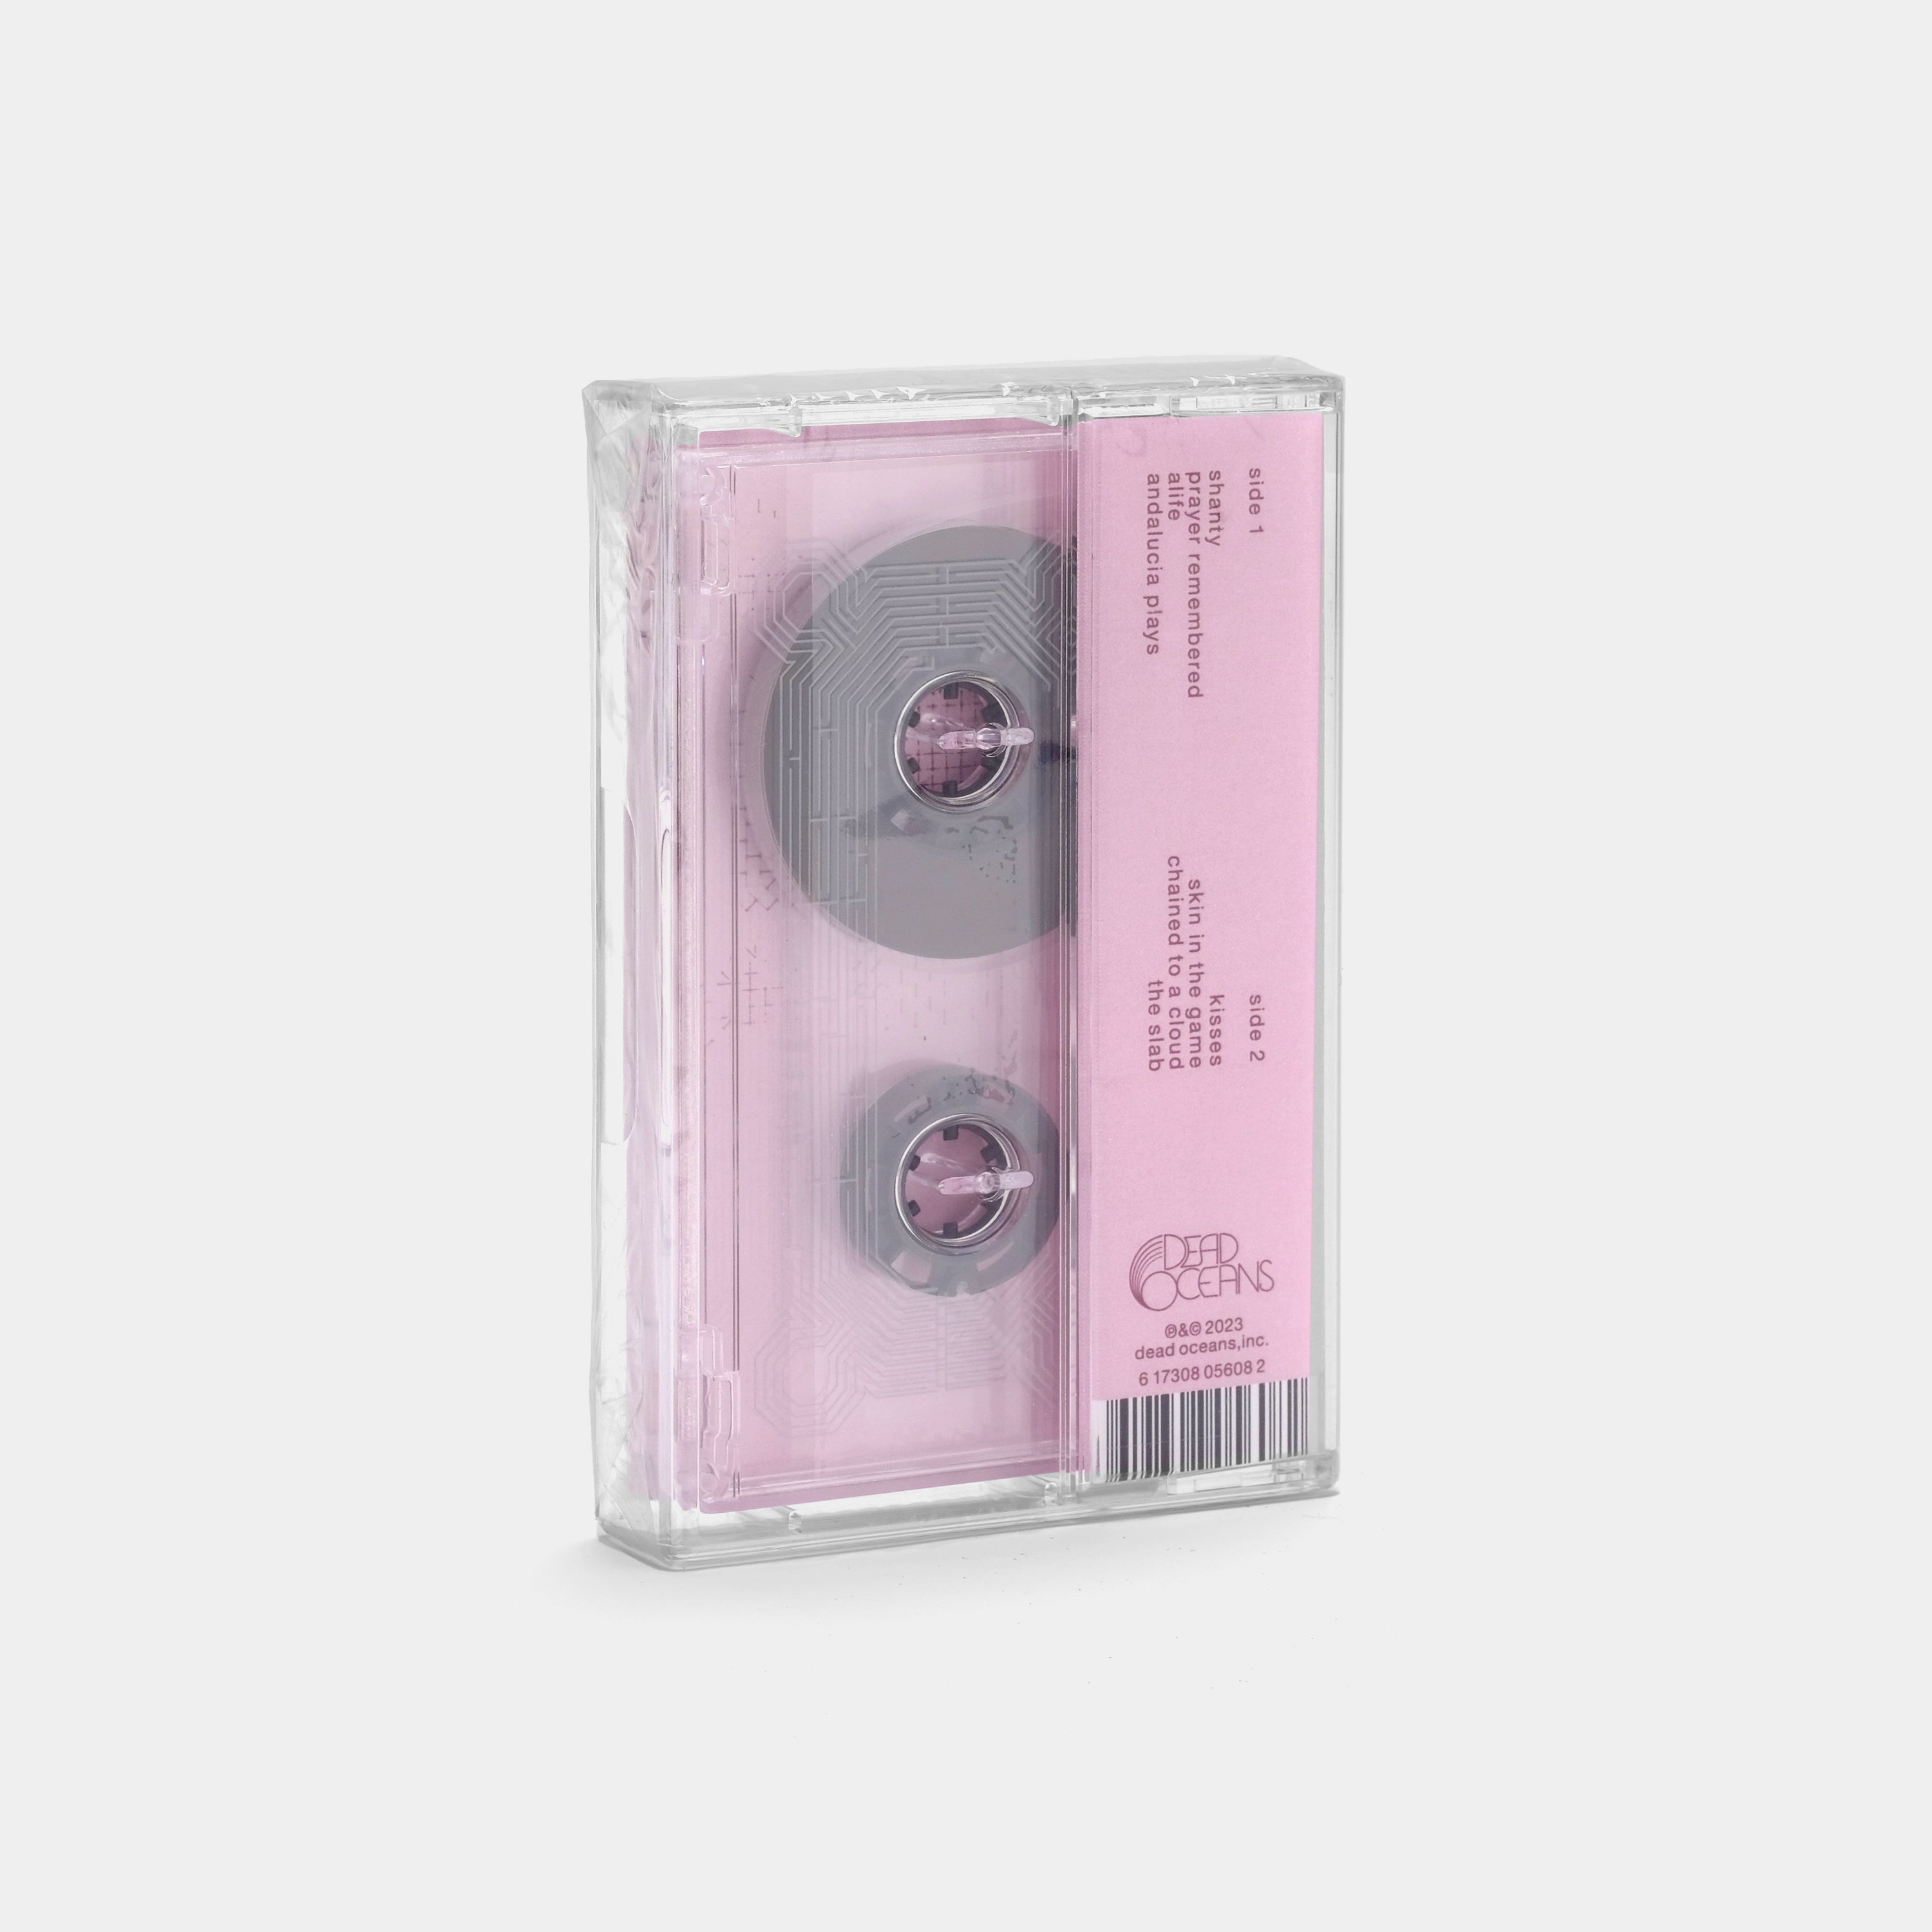 Slowdive - Everything Is Alive Cassette Tape